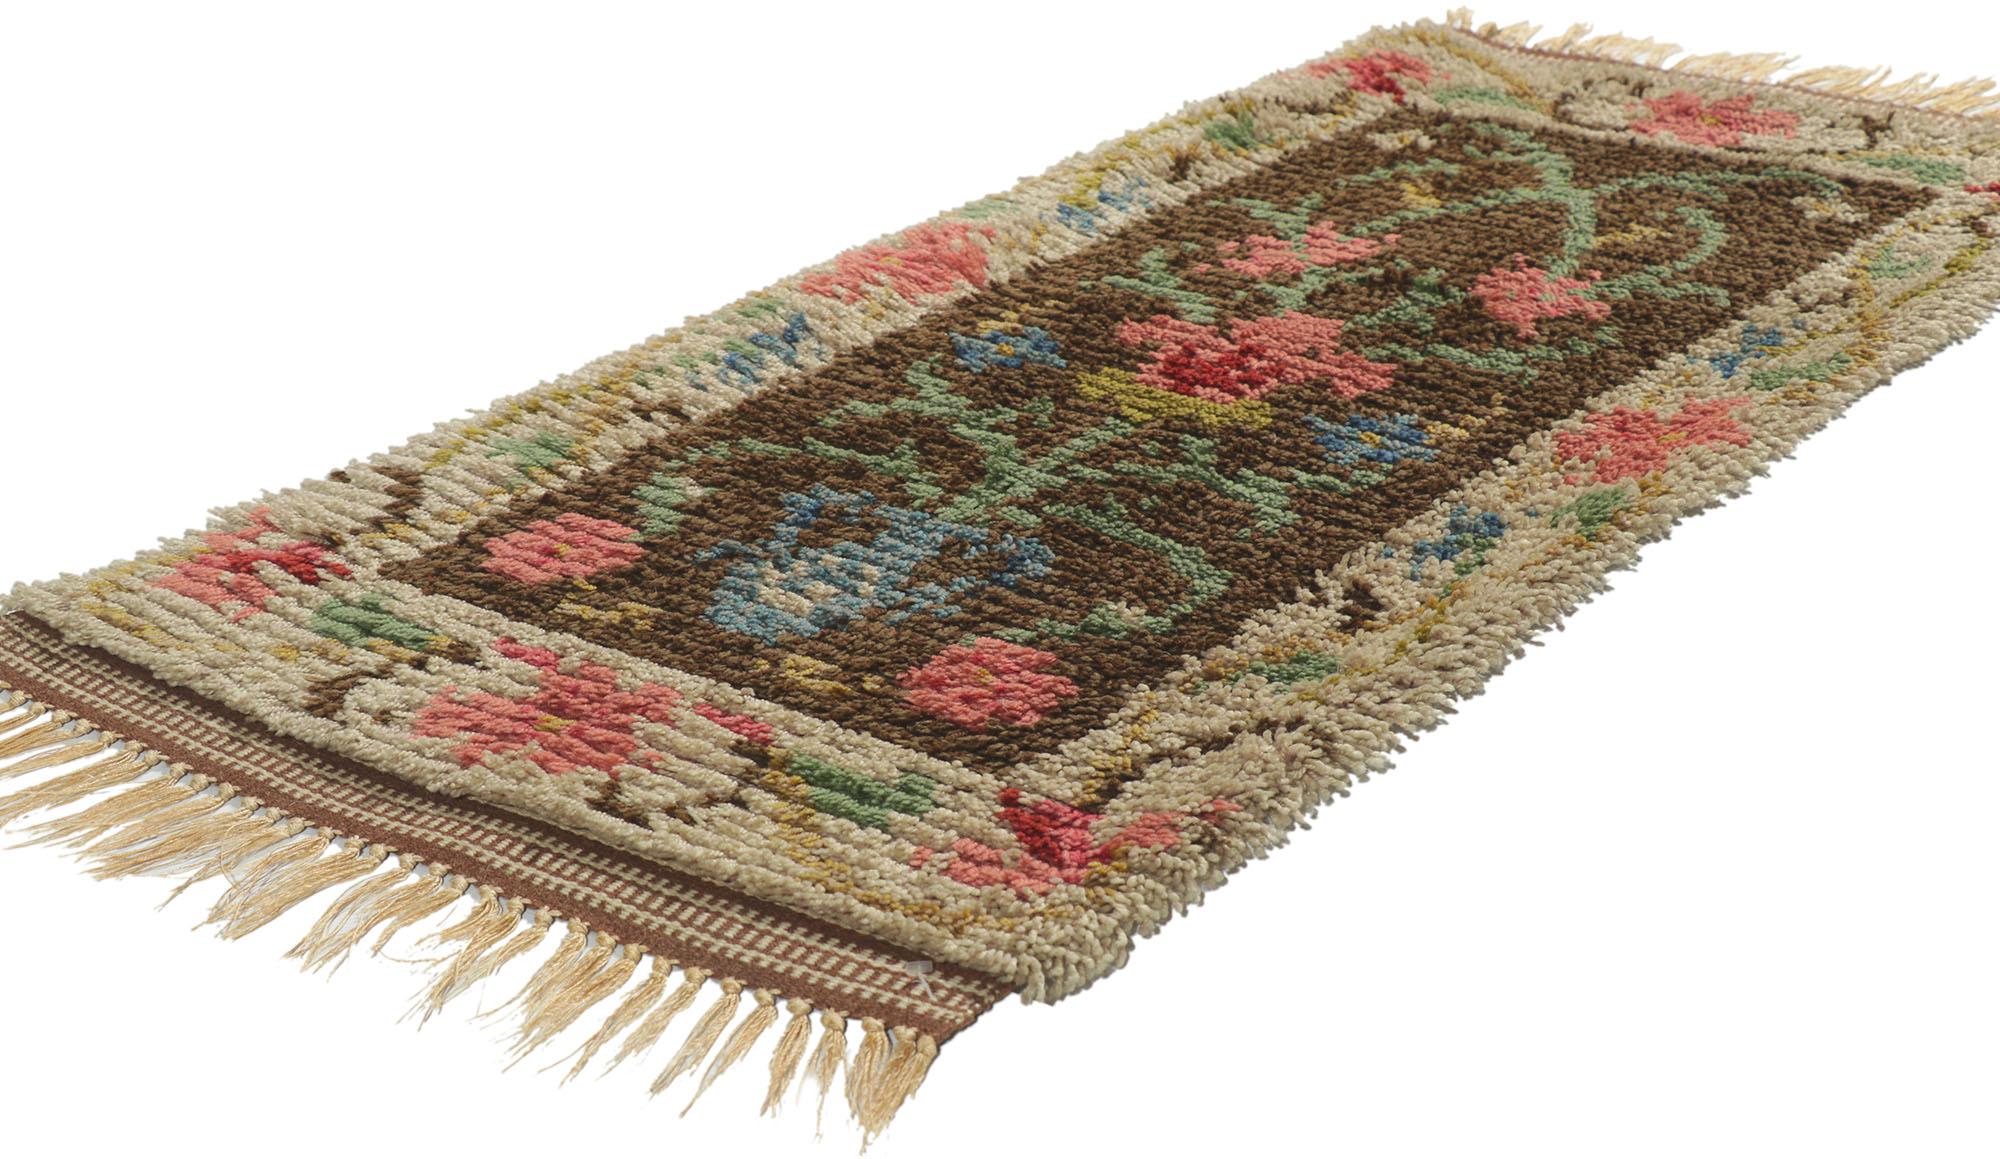 78269 Vintage Finnish Rya rug with Scandinavian Modern Style 1'11 x 4'00. Full of tiny details and a bold expressive design combined with folk art style, this hand-knotted wool vintage Finnish Rya rug is a captivating vision of woven